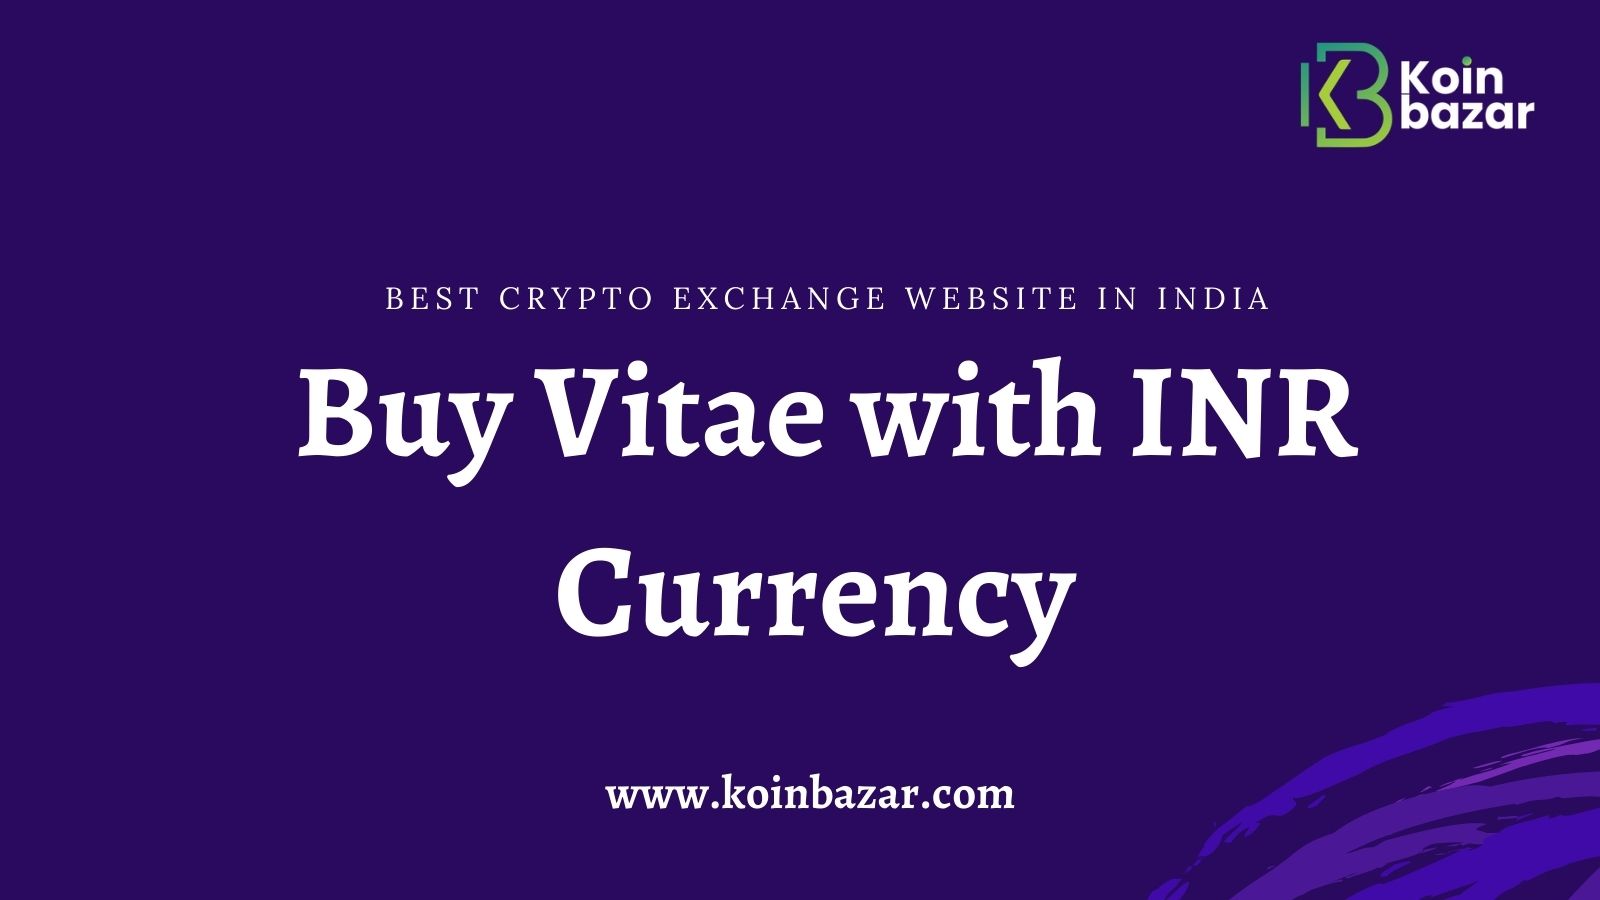 Article about How to buy vitae token legally